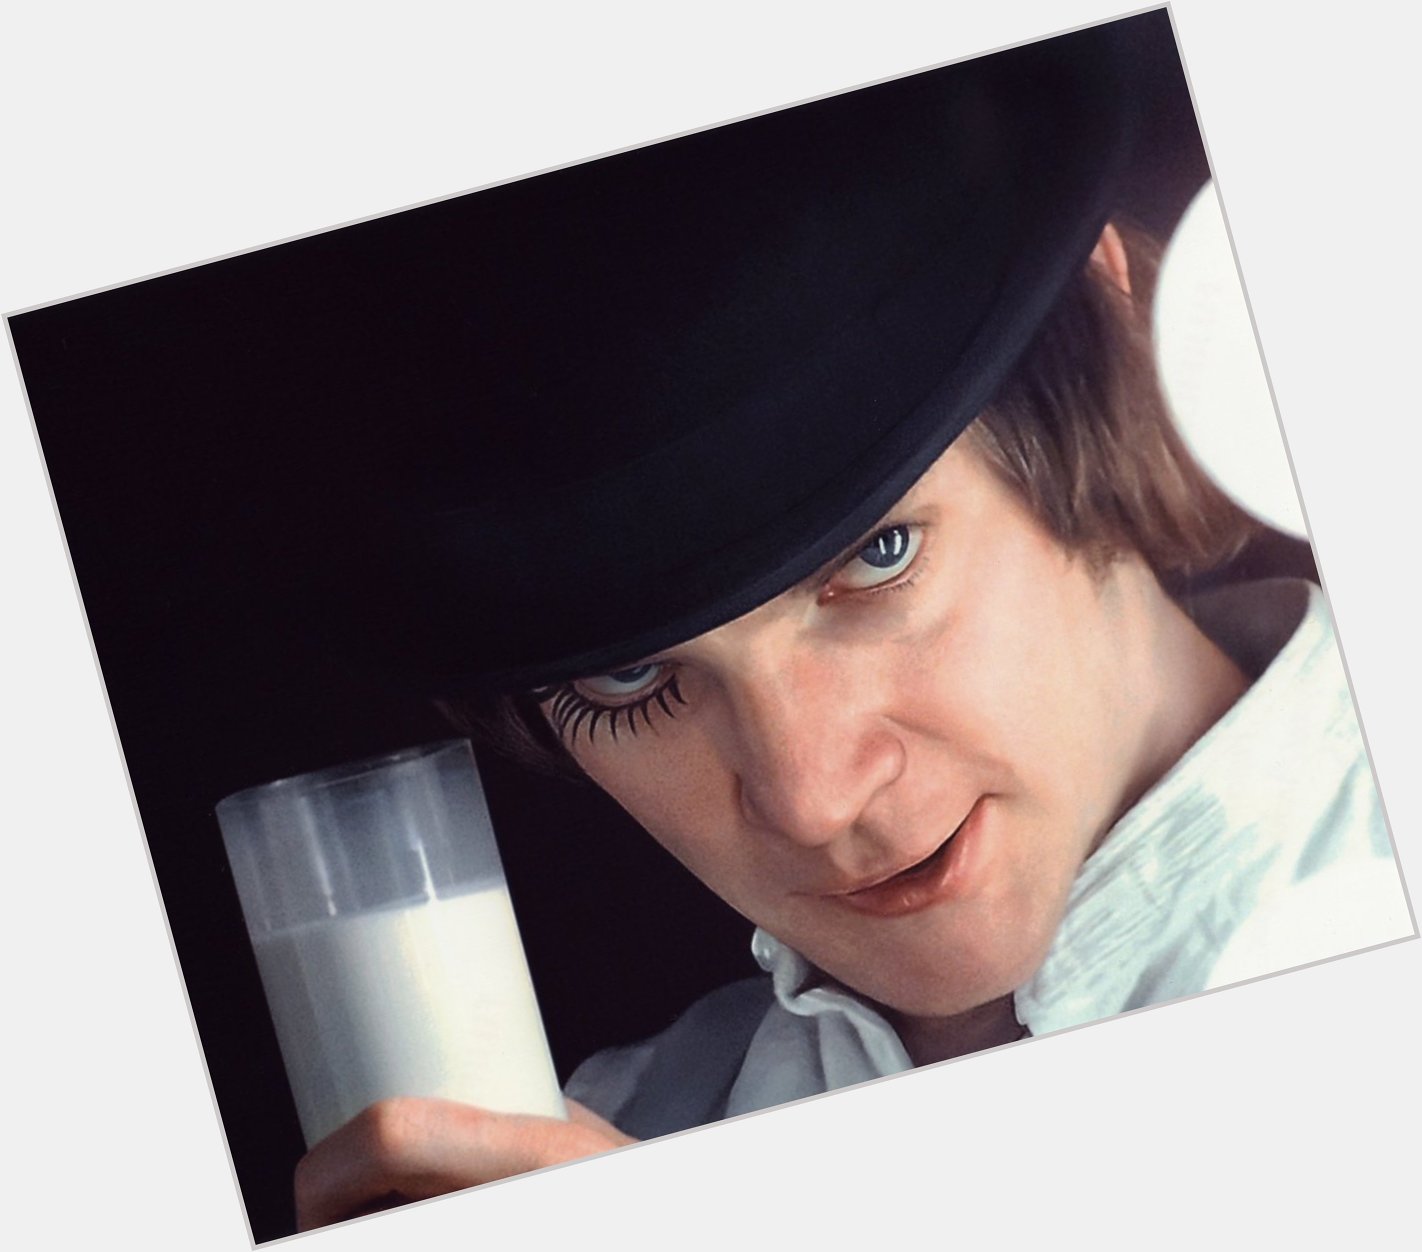 Let\s raise a glass of milk and wish Malcolm McDowell a happy 80th birthday. 